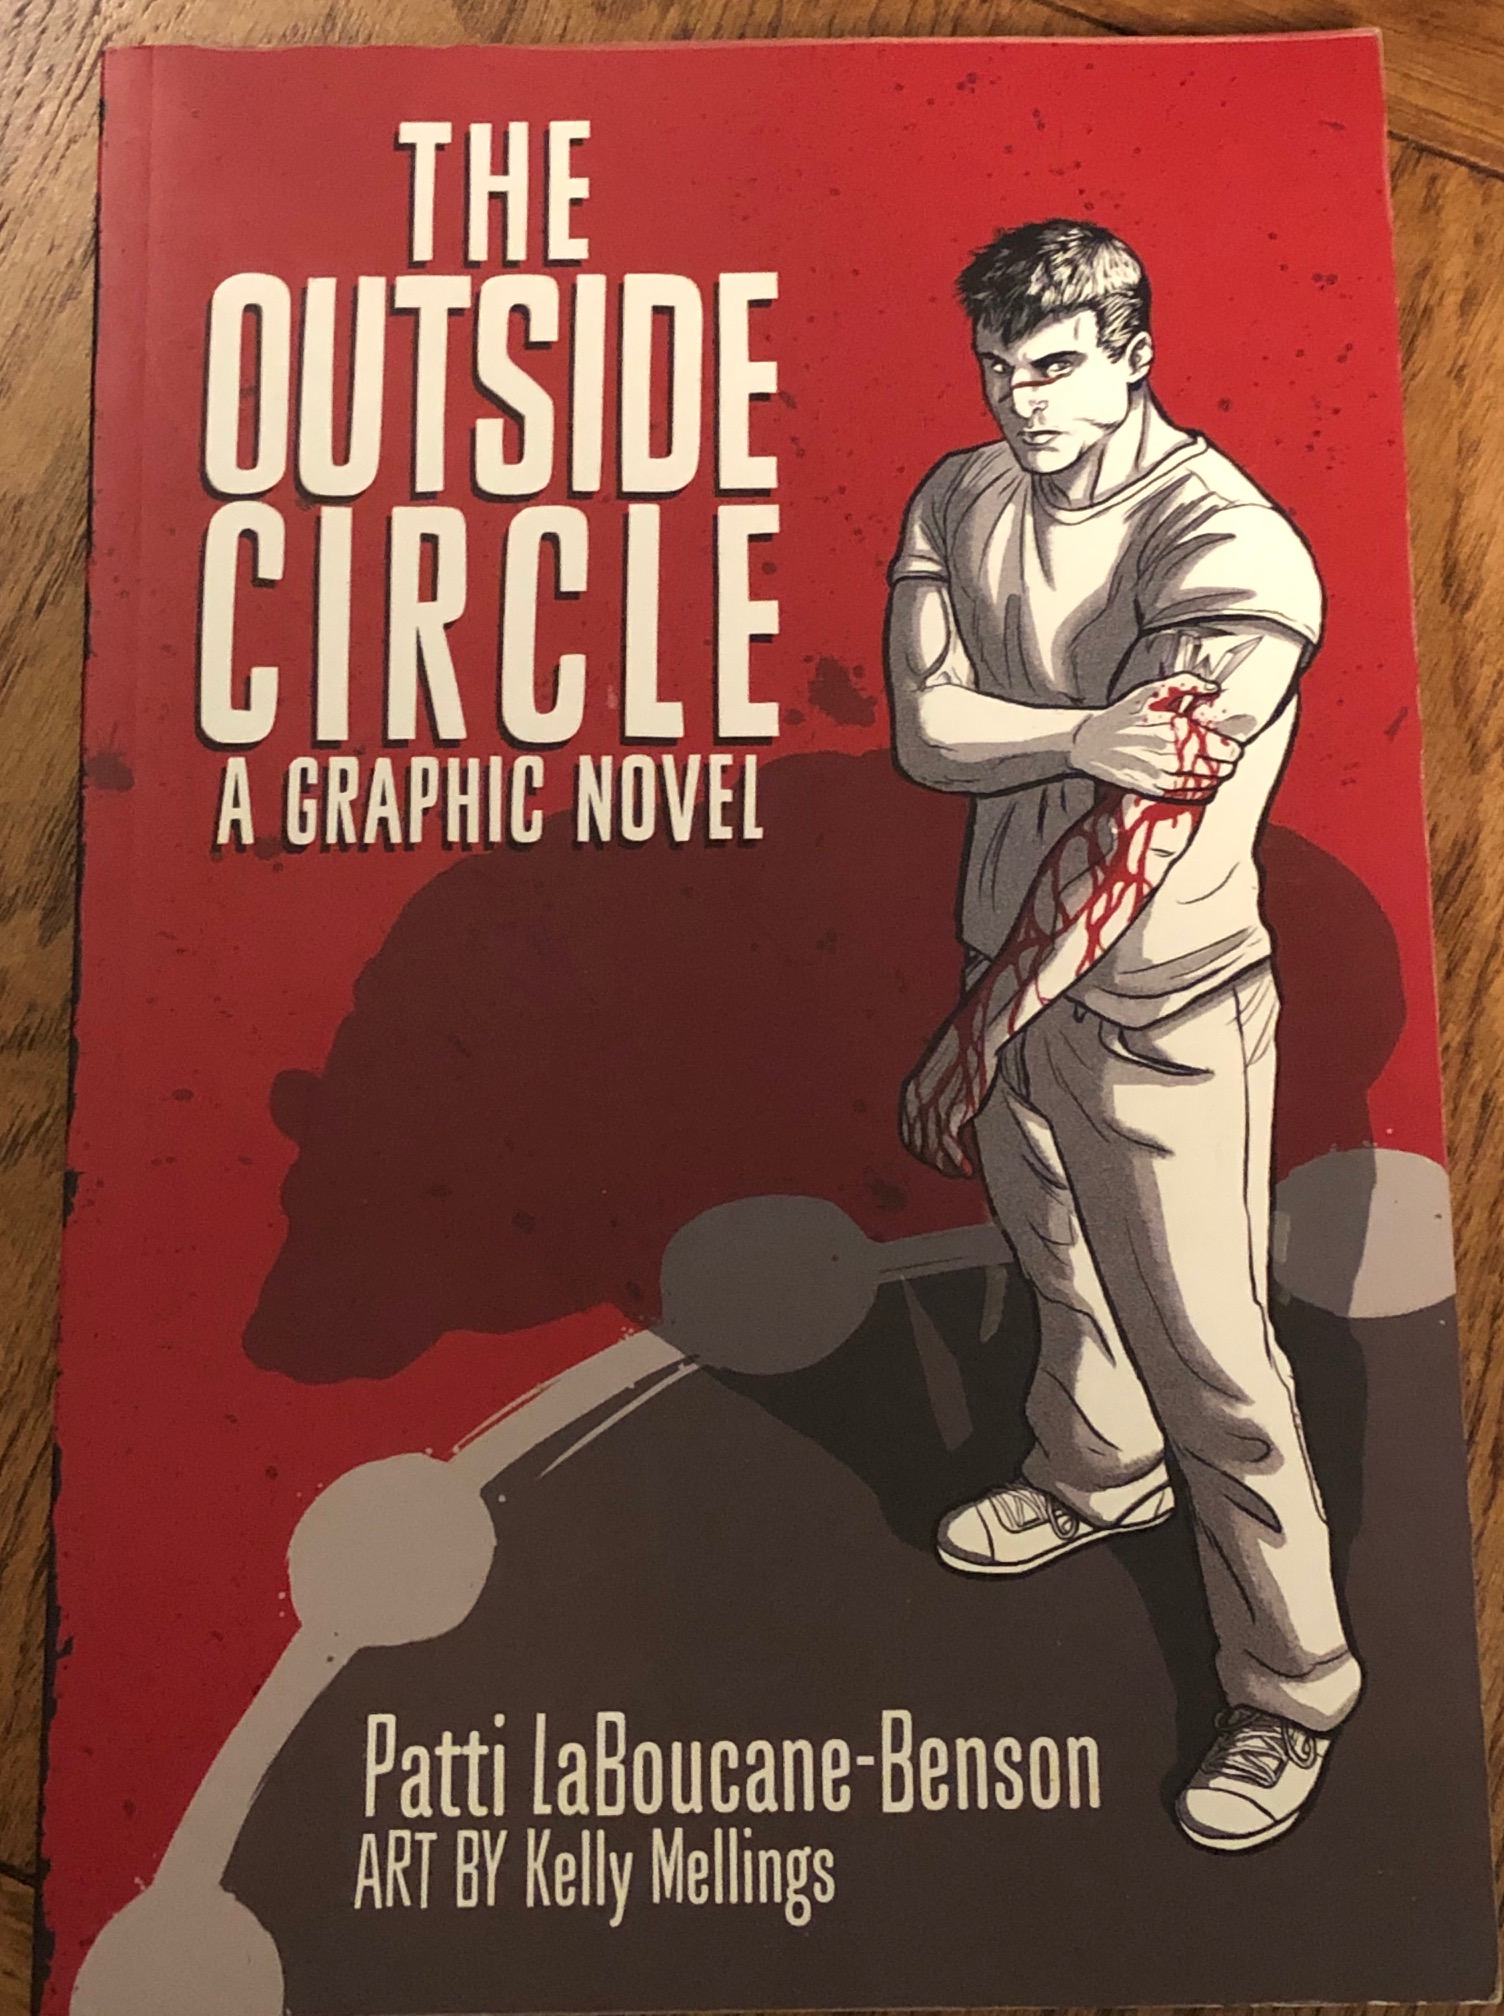 The Outside Circle: A Graphic Novel by Patti LaBoucance-Benson, art by Kelly Mellings